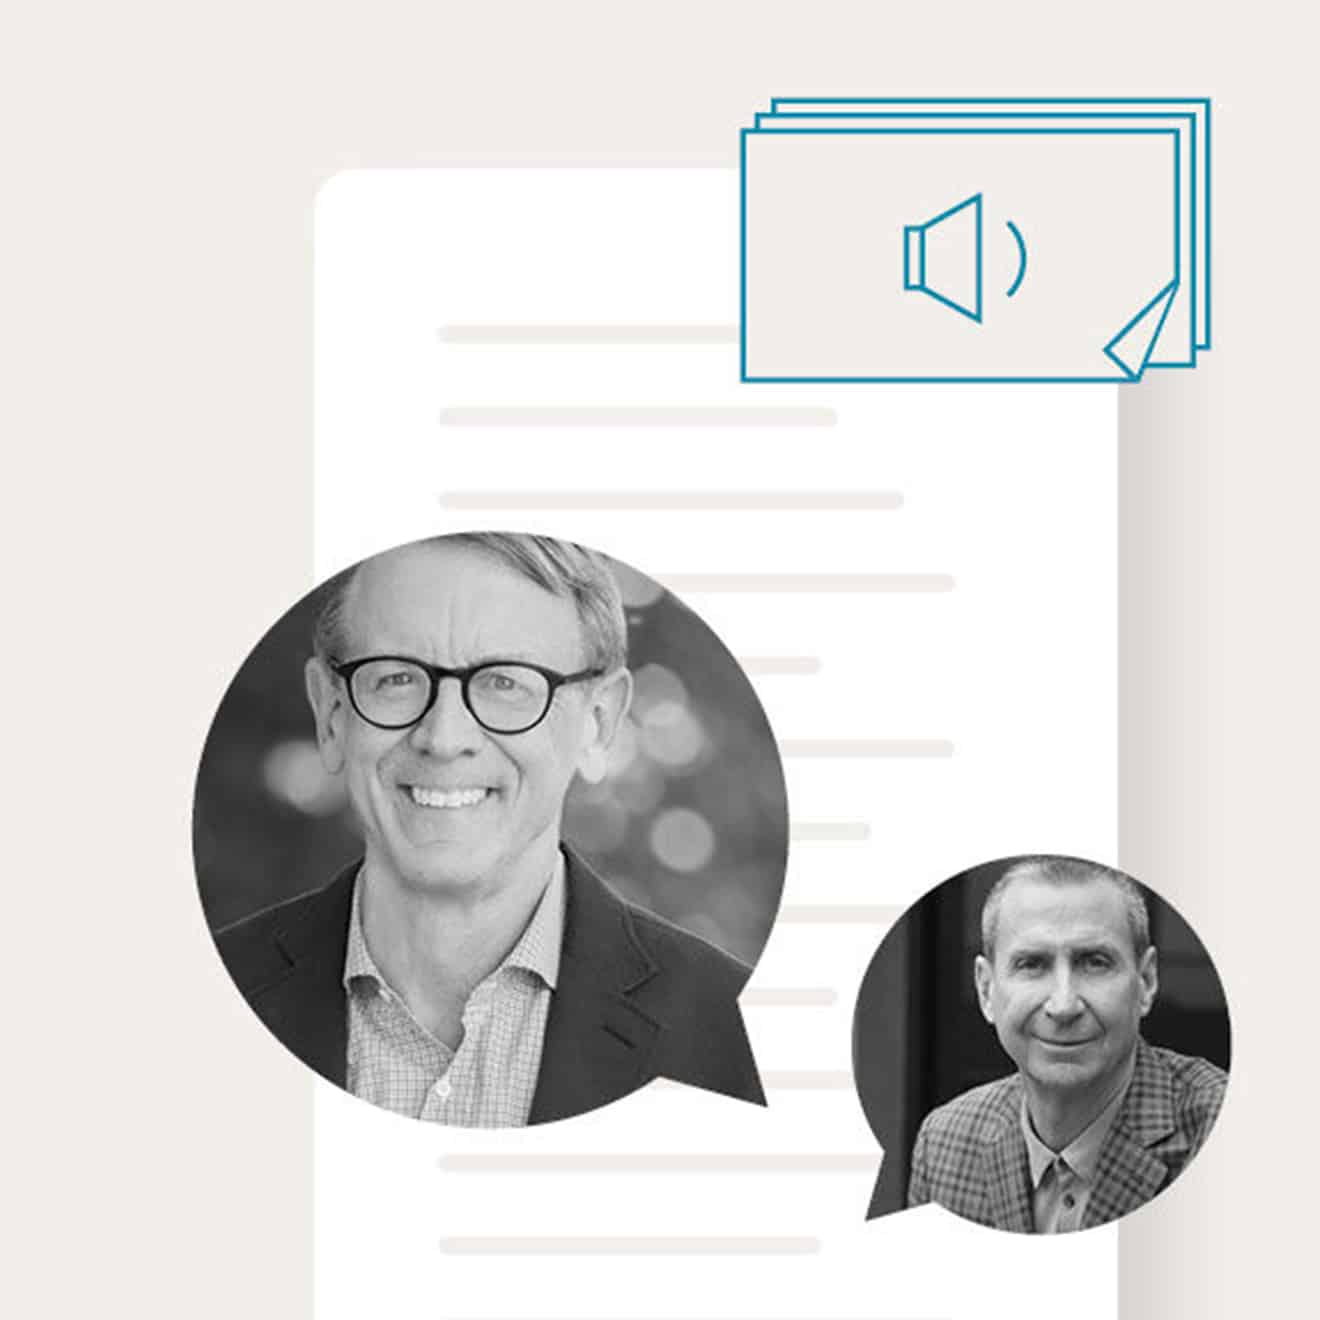 Highlights from our LIVE Q&A with John Doerr and Doug Dennerline